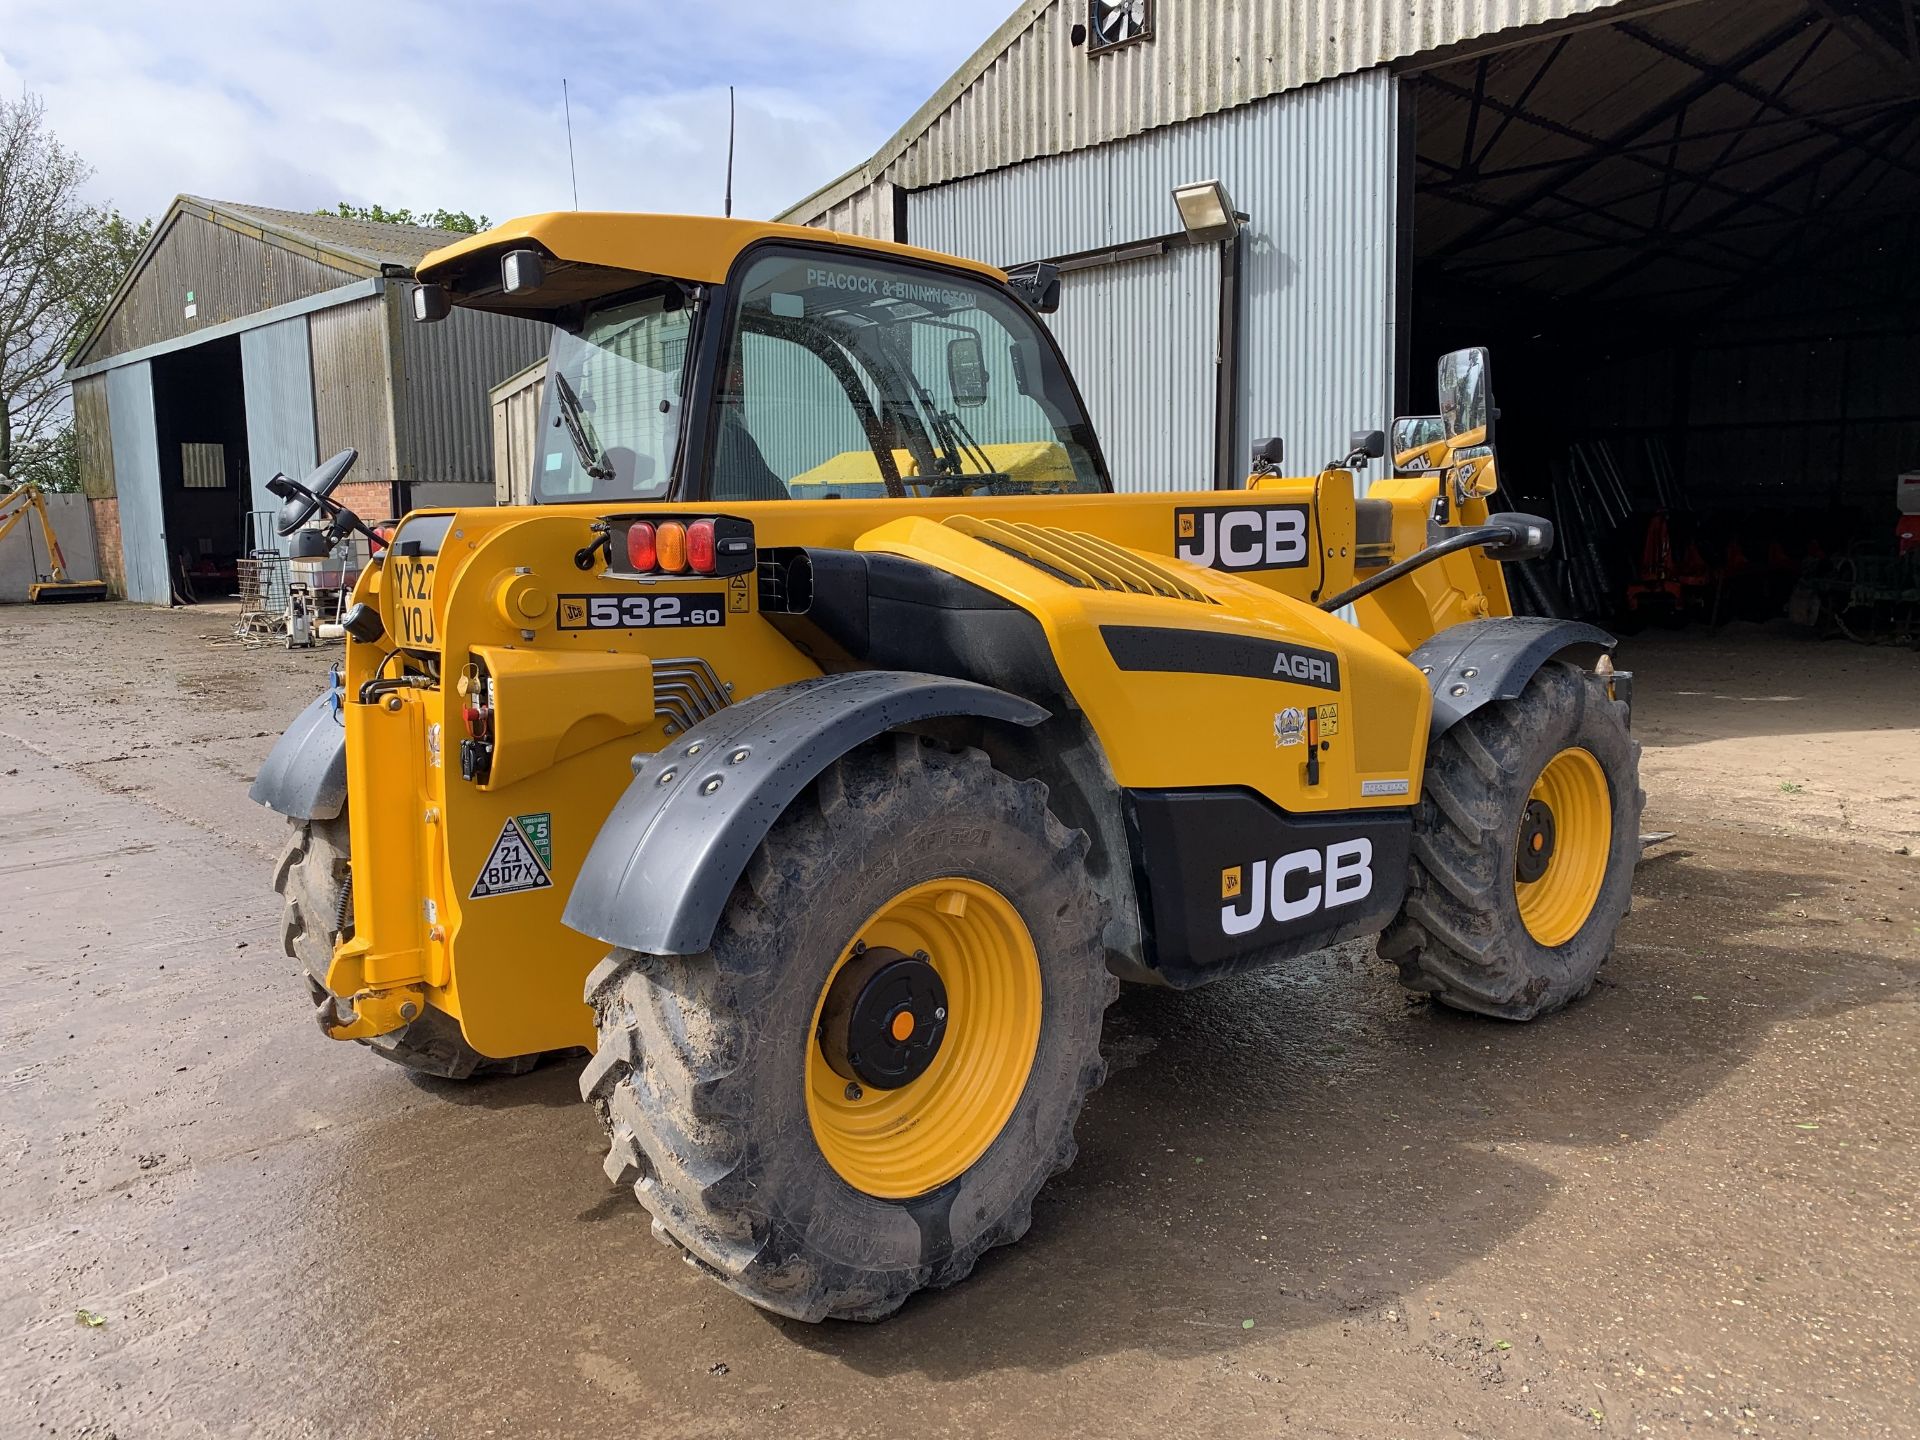 2022 JCB 532-60 telehandler, YX22 VOJ, 760 hours, with pallet tines, pin & cone headstock, pickup - Image 12 of 13